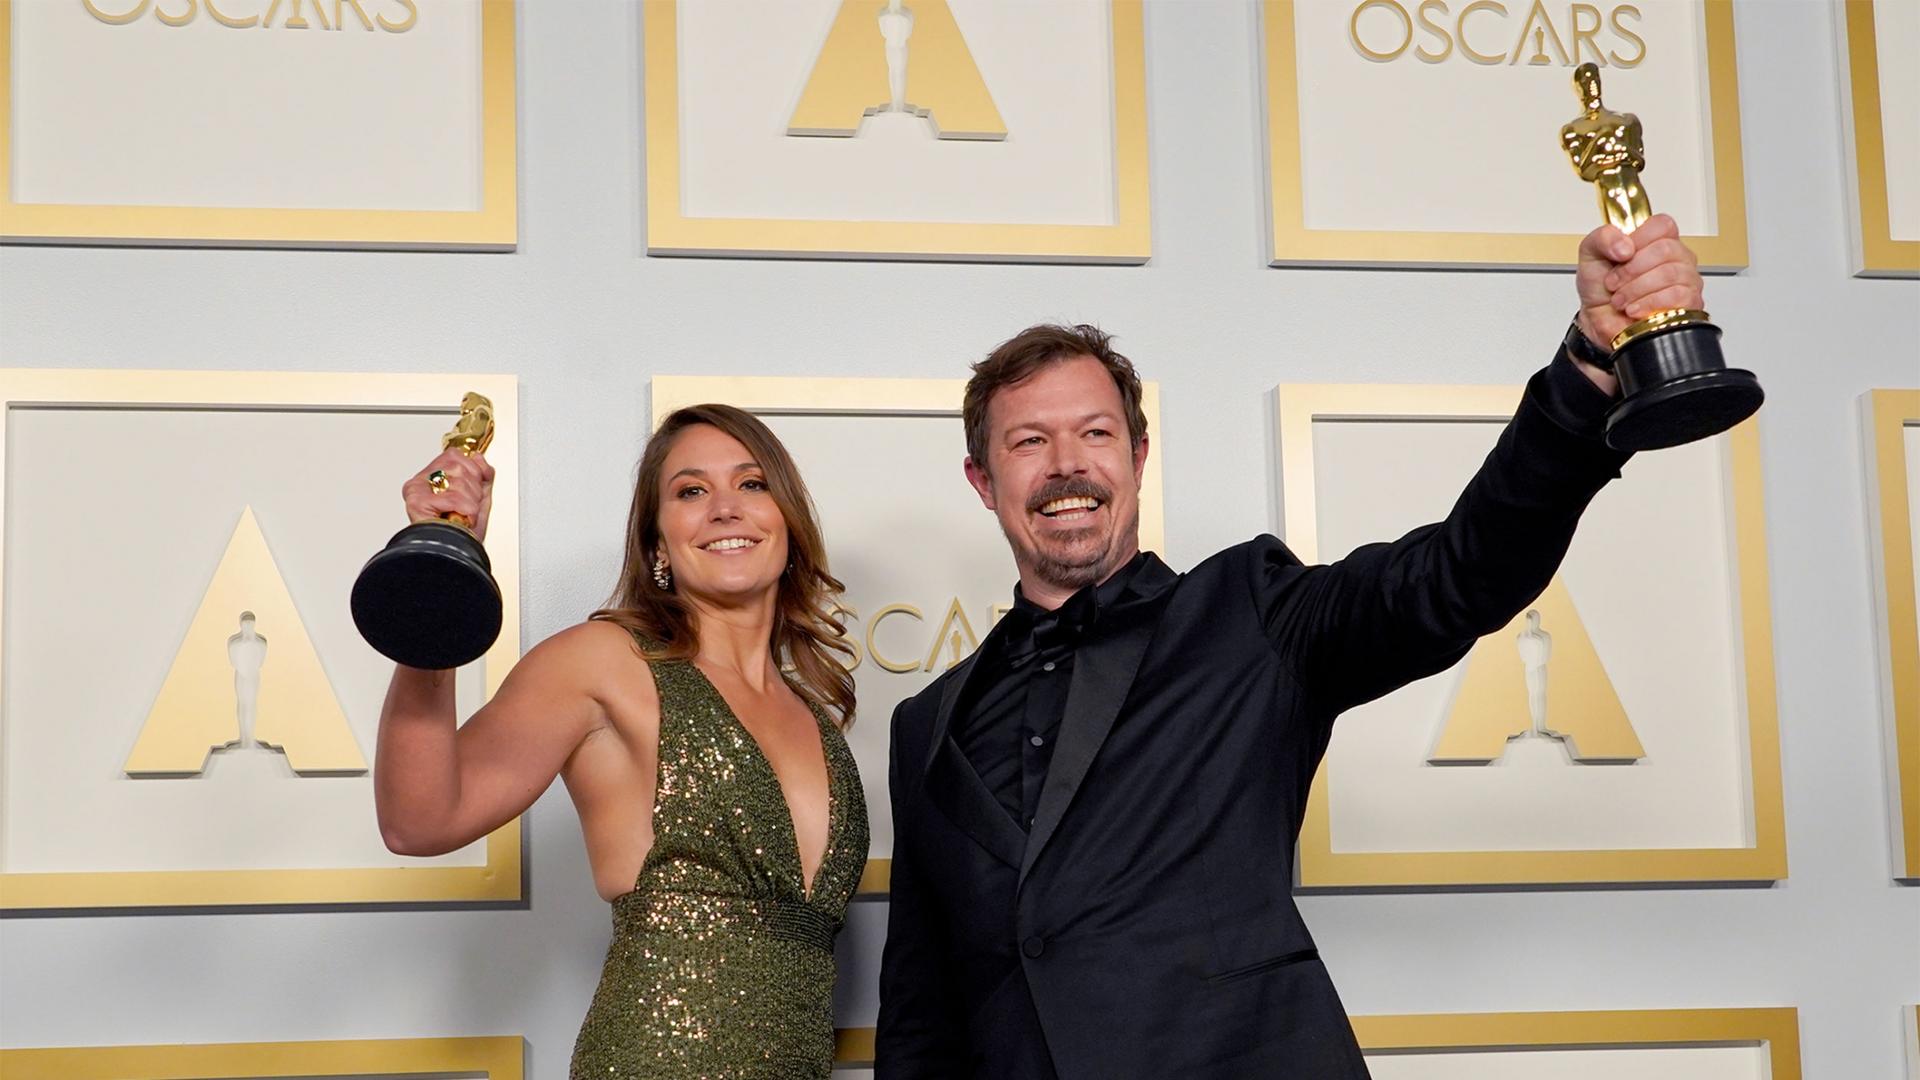 Woman in green dress and man in black suit hold up Oscars